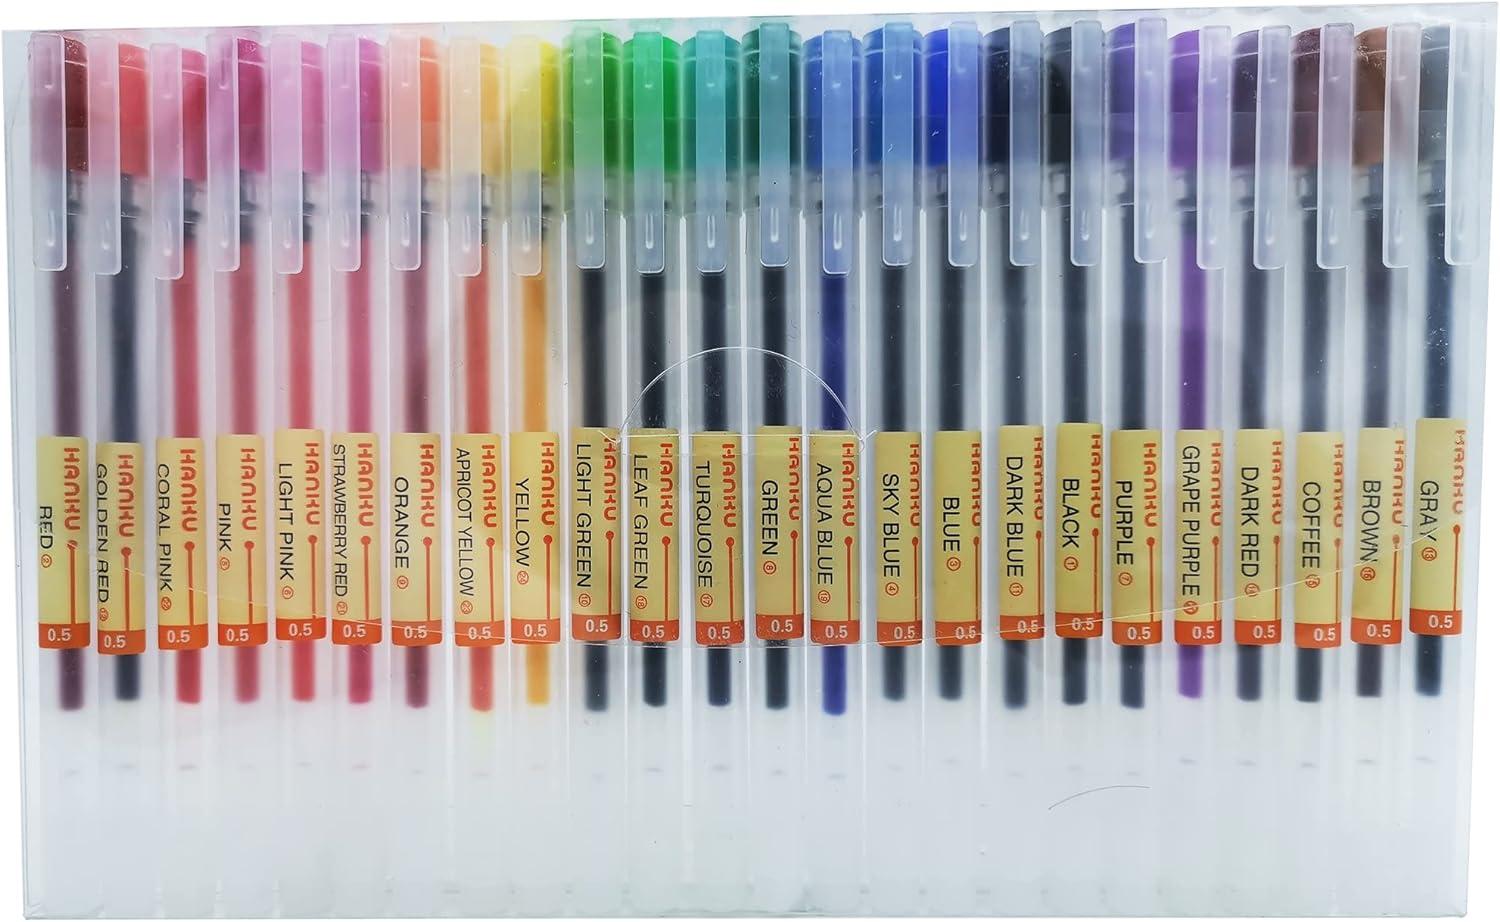 ‎beiwo premium gel ink ball point pen 0.5mm fine point 24 color pens  ‎beiwo